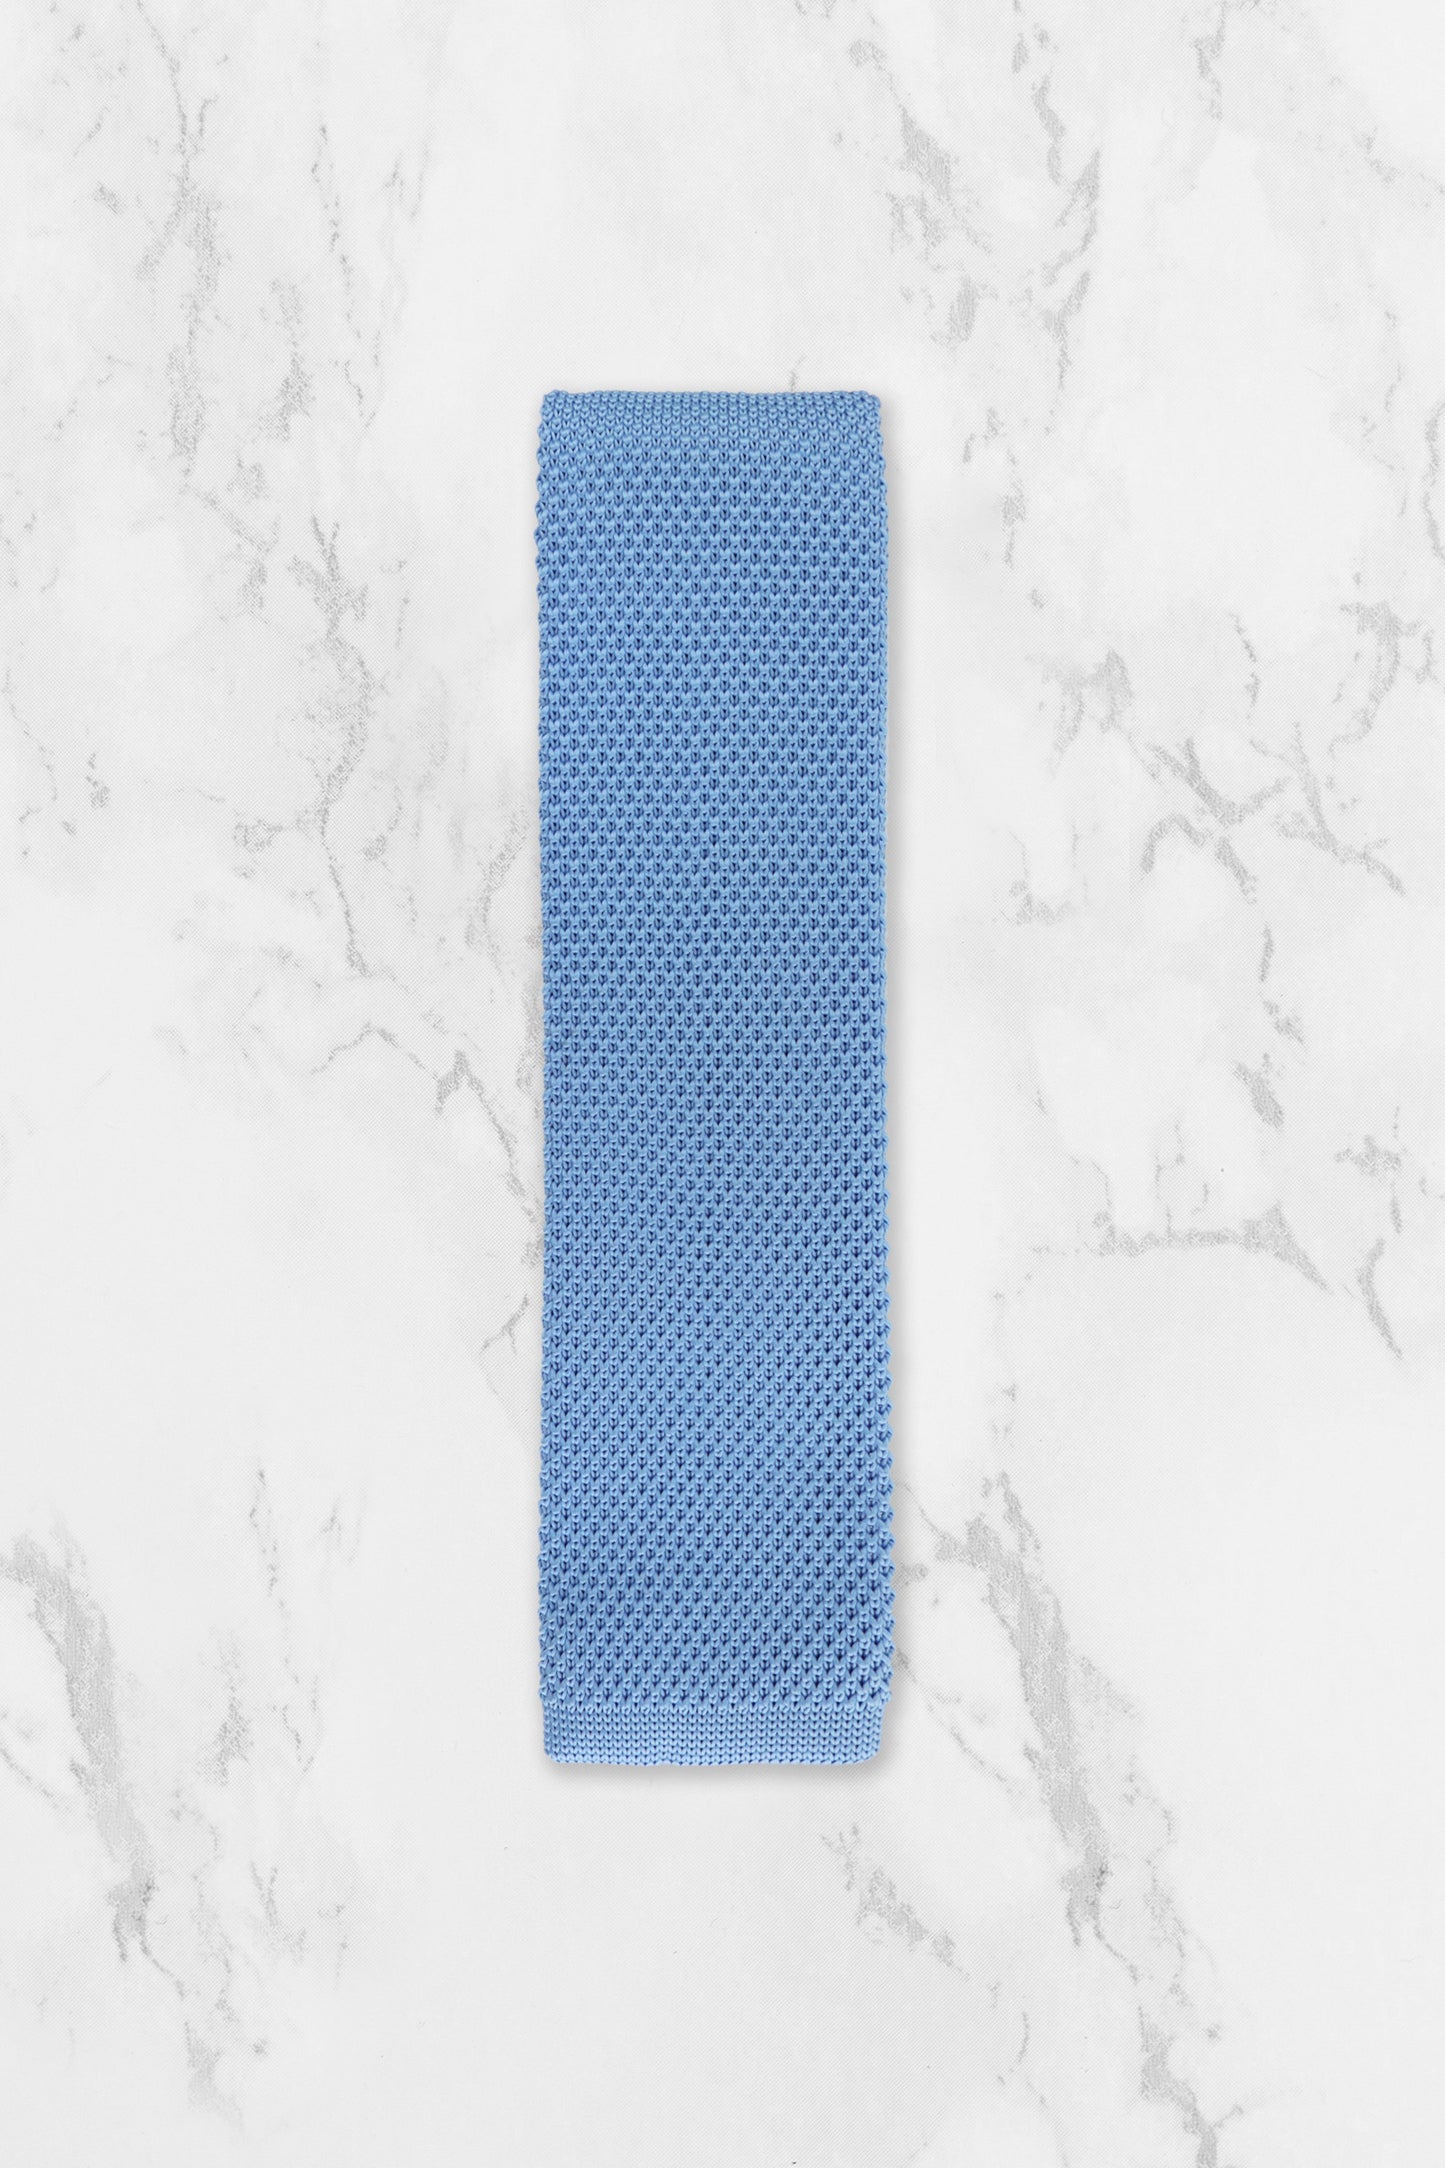 100% Polyester Square End Knitted Tie - Light Blue